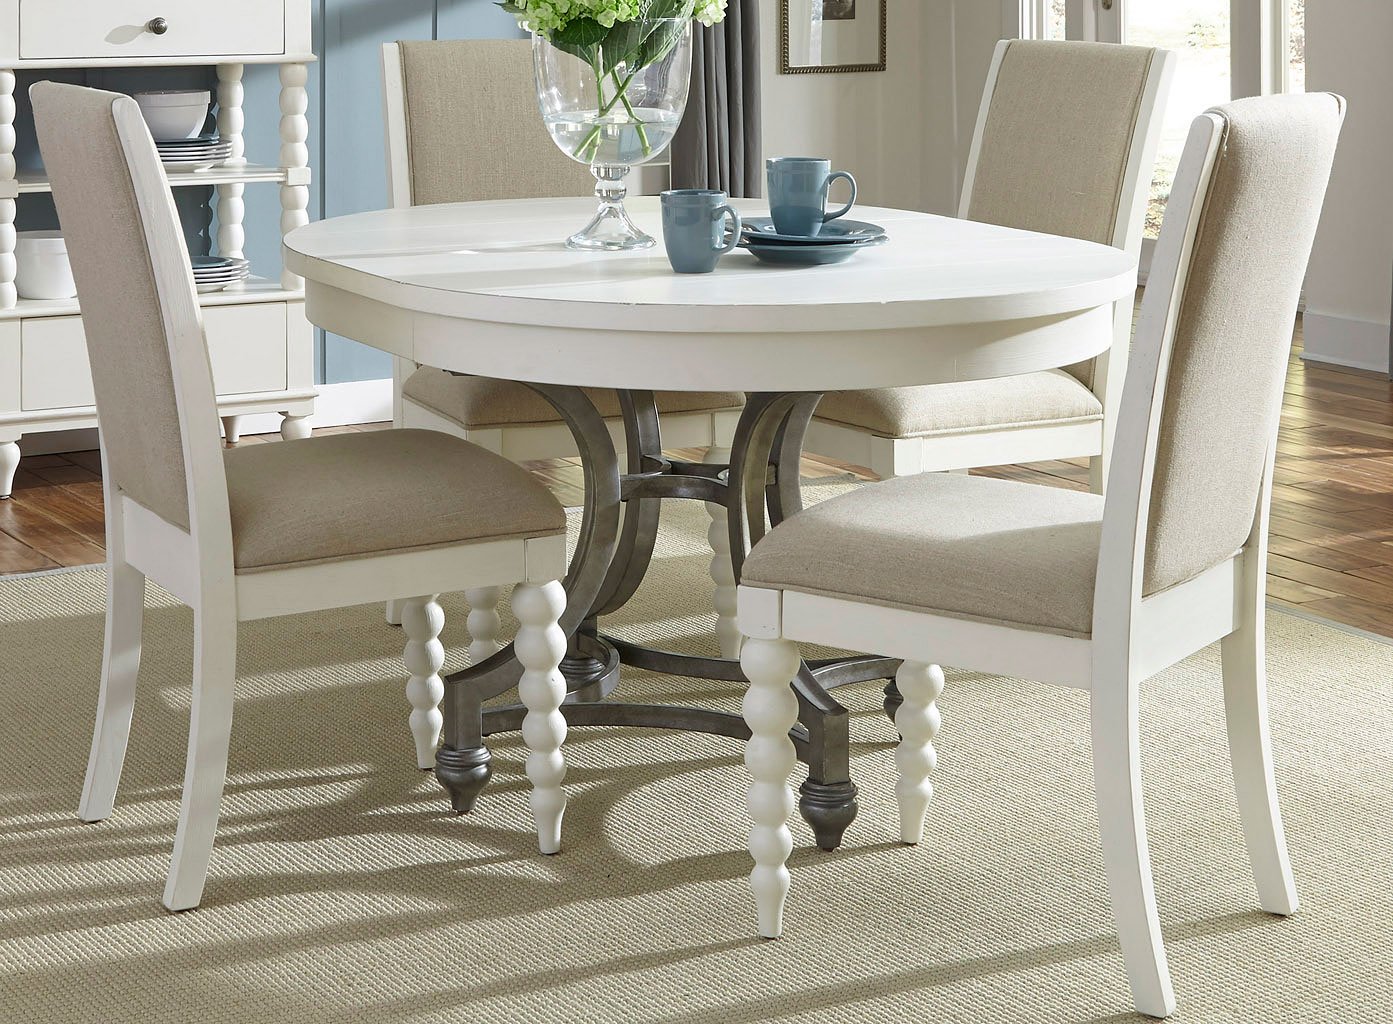 Harbor View II Round Dining Room Set W/ Upholstered Chairs Liberty